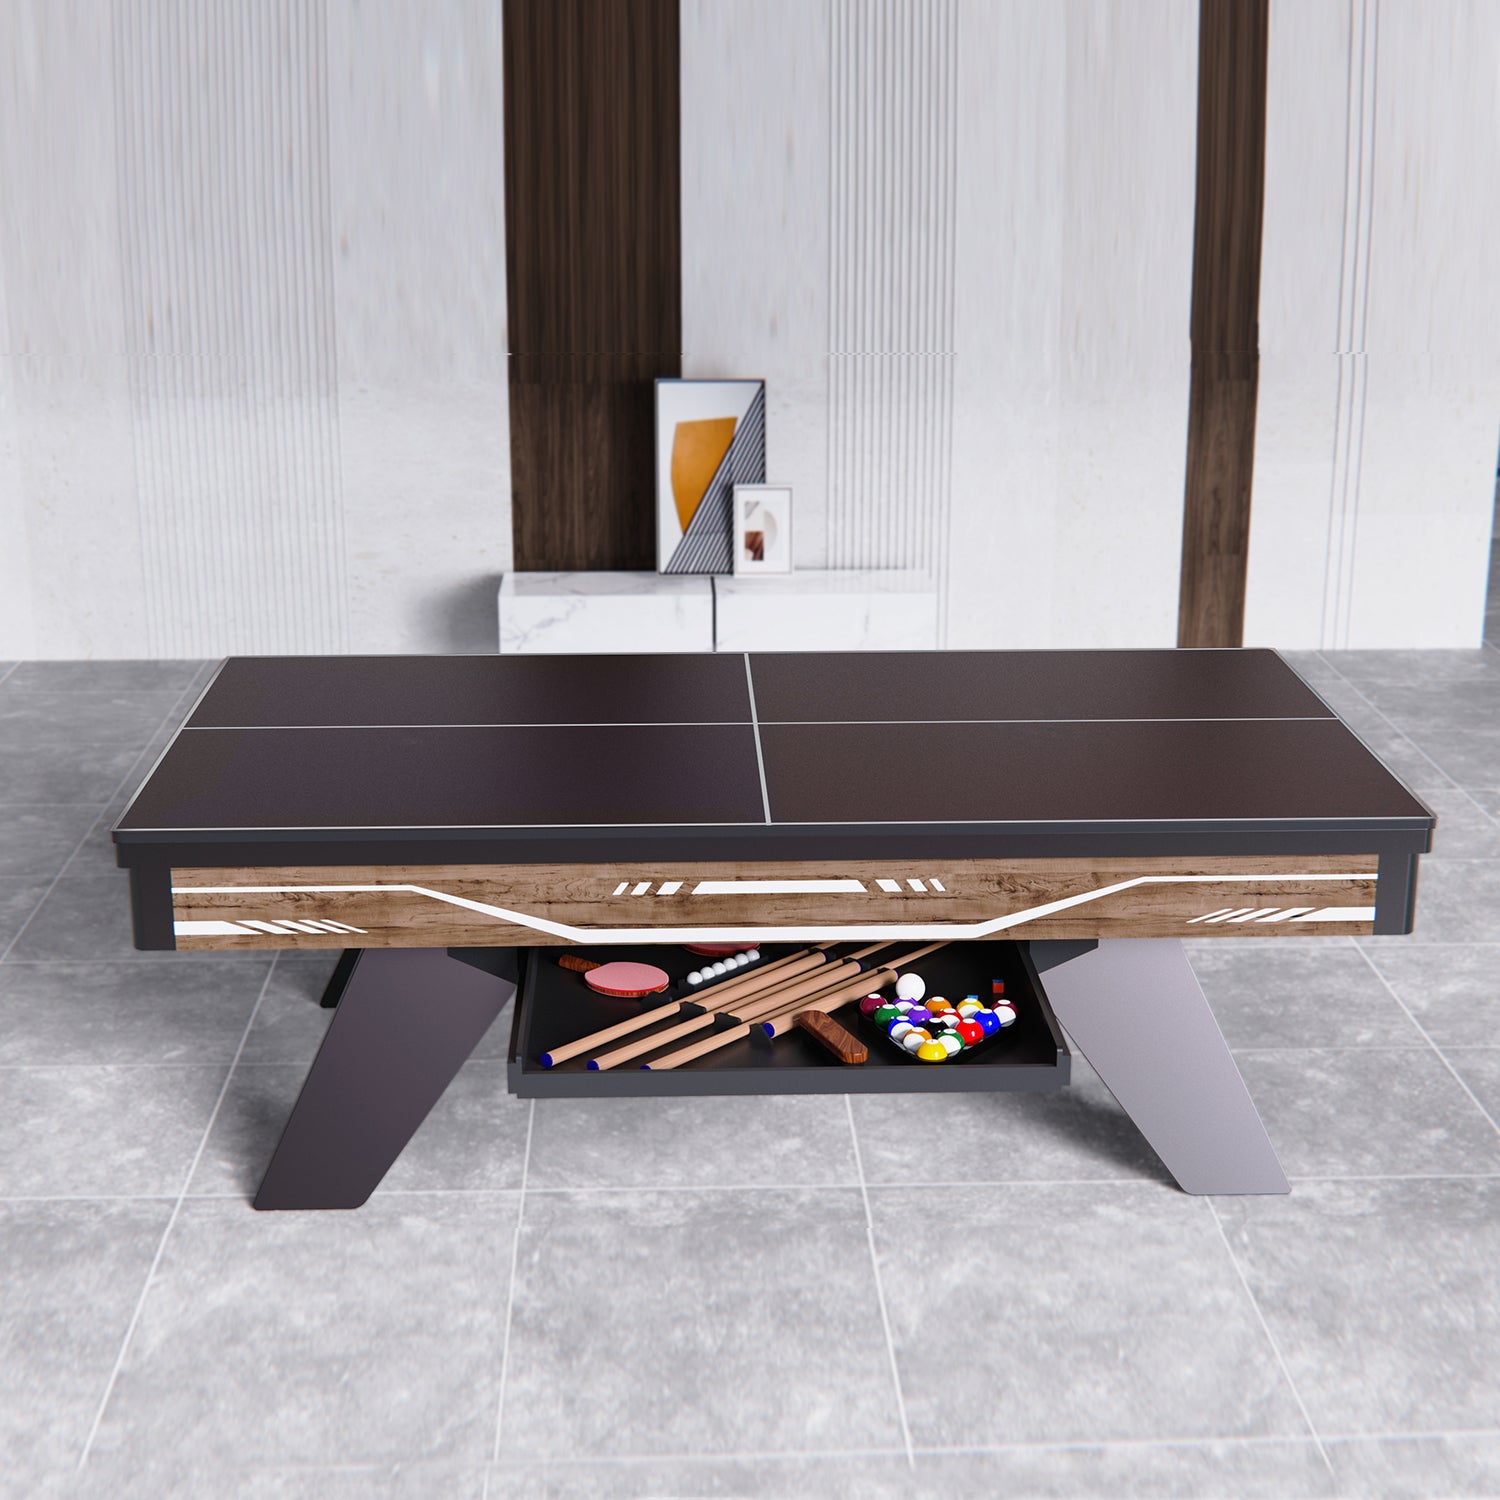 Cooma Dining/Office Pool Table-8FT 3IN1